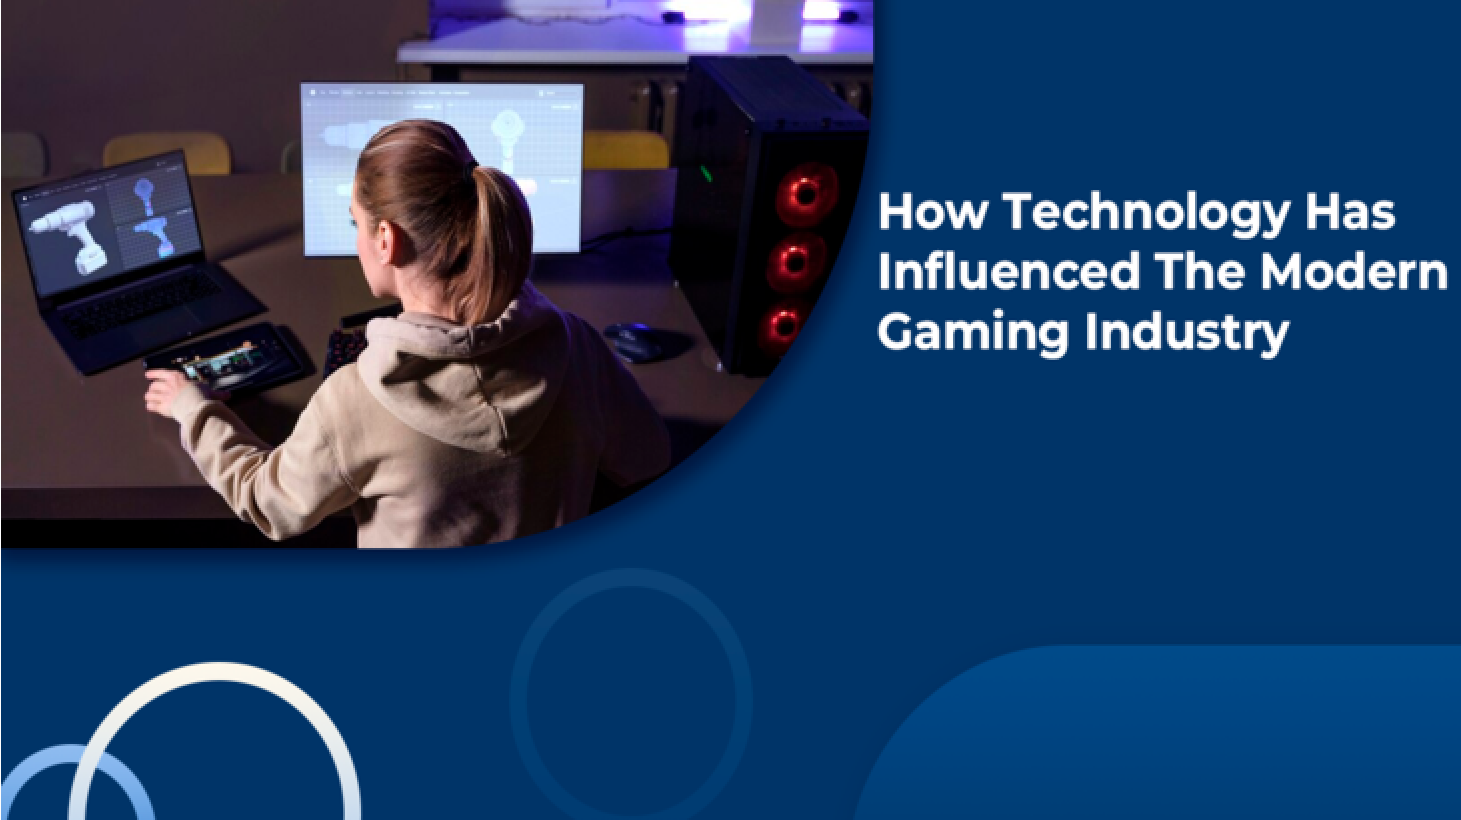 How Technology Has Influenced The Modern Gaming Industry